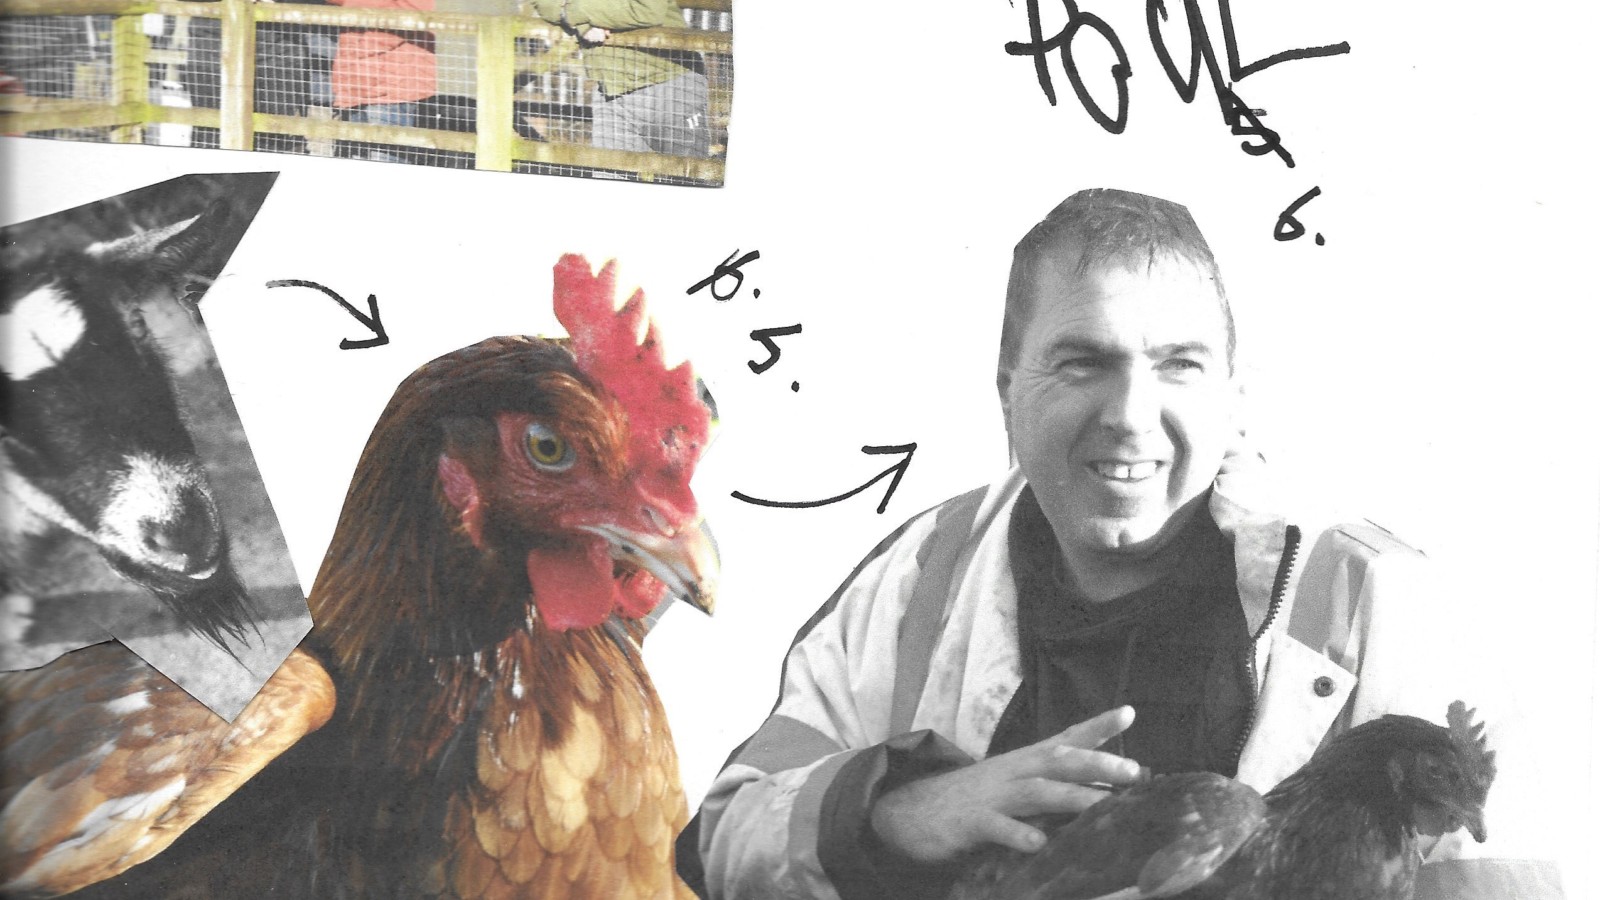 A collage with a chicken, a black and white image of a man holding a chicken and a black and white picture of a goat.